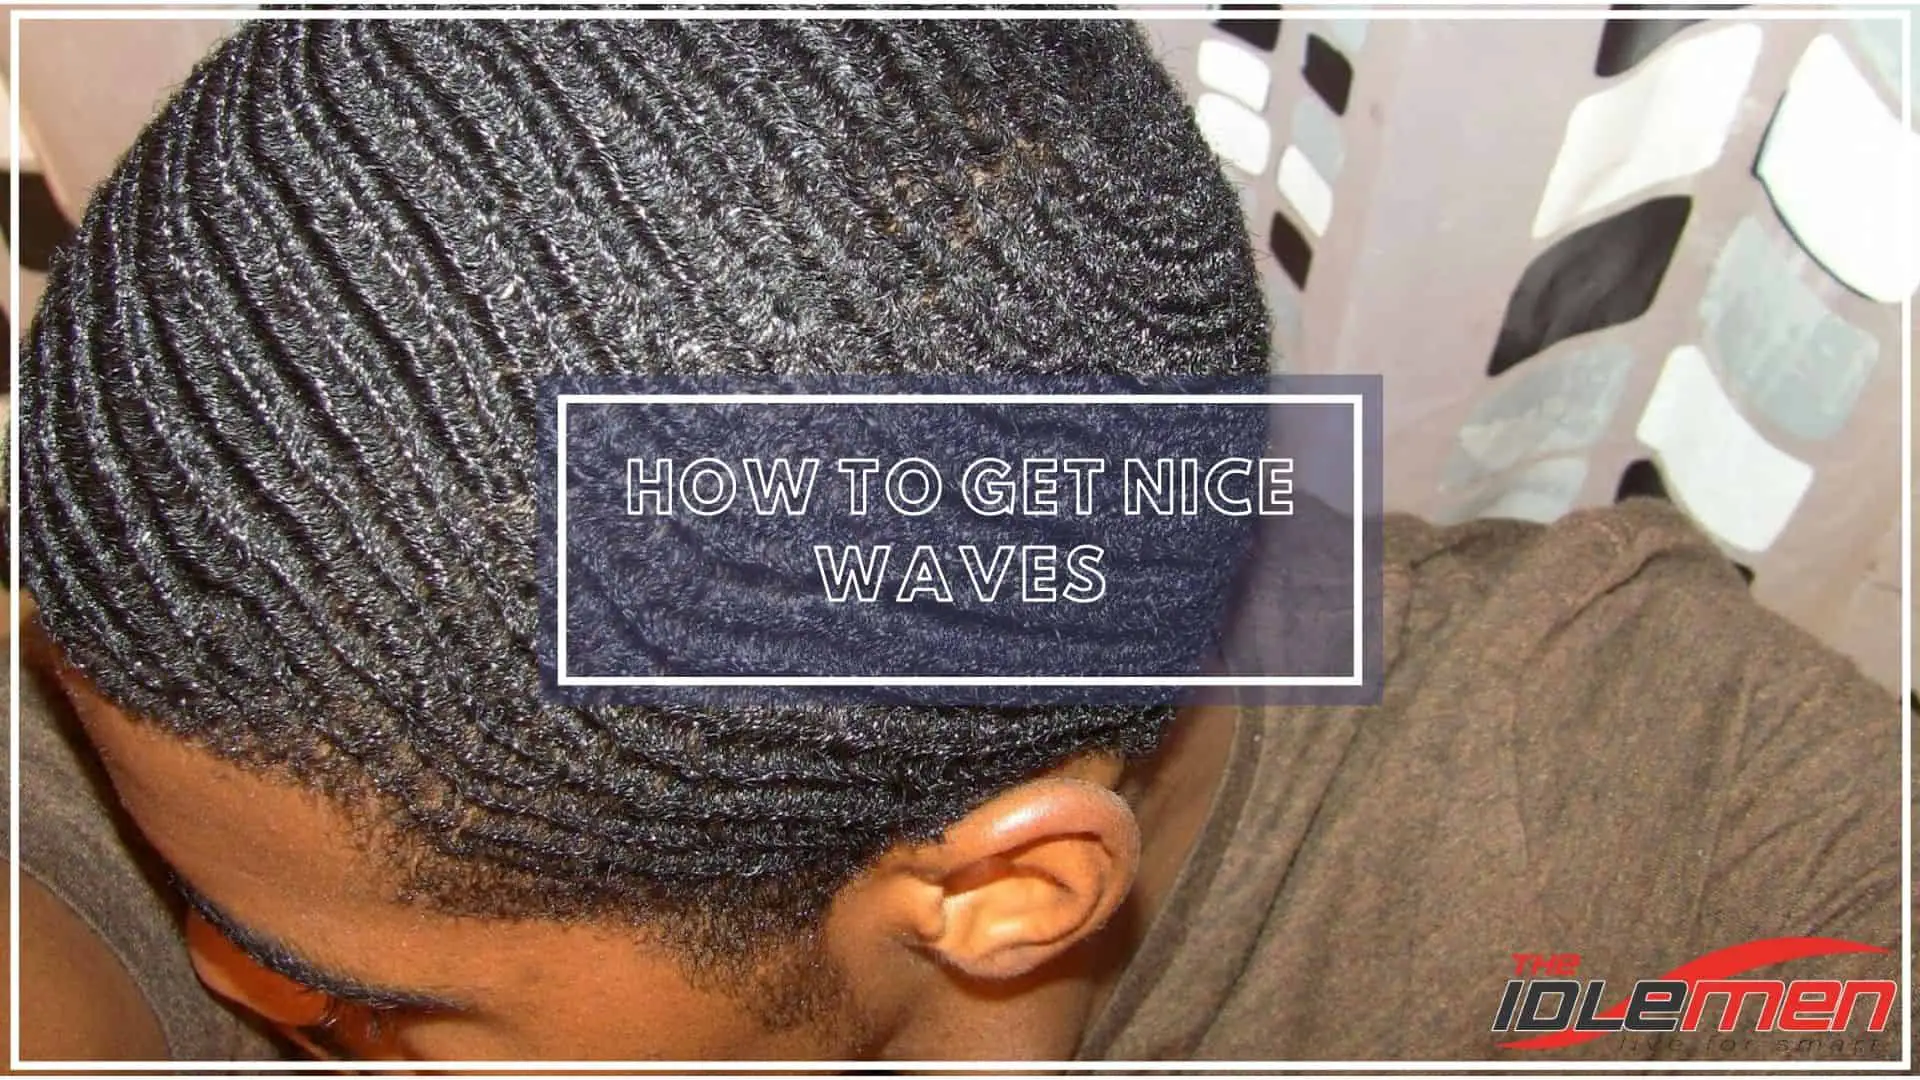 HOW TO GET NICE WAVES